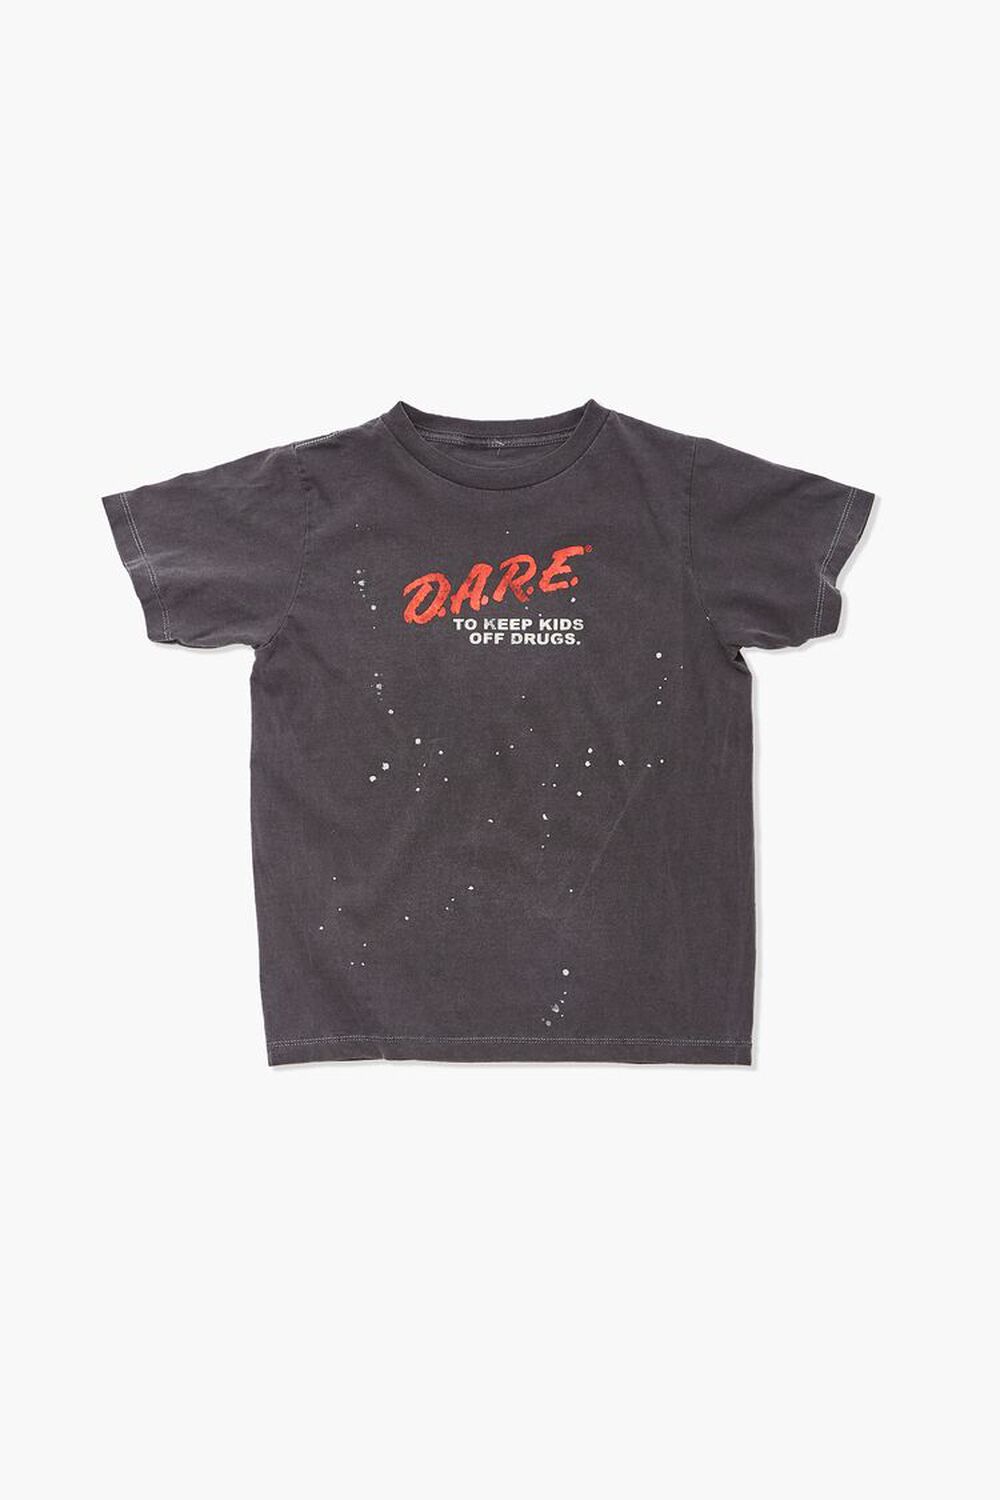 CHARCOAL/MULTI Girls D.A.R.E Graphic Tee (Kids), image 1